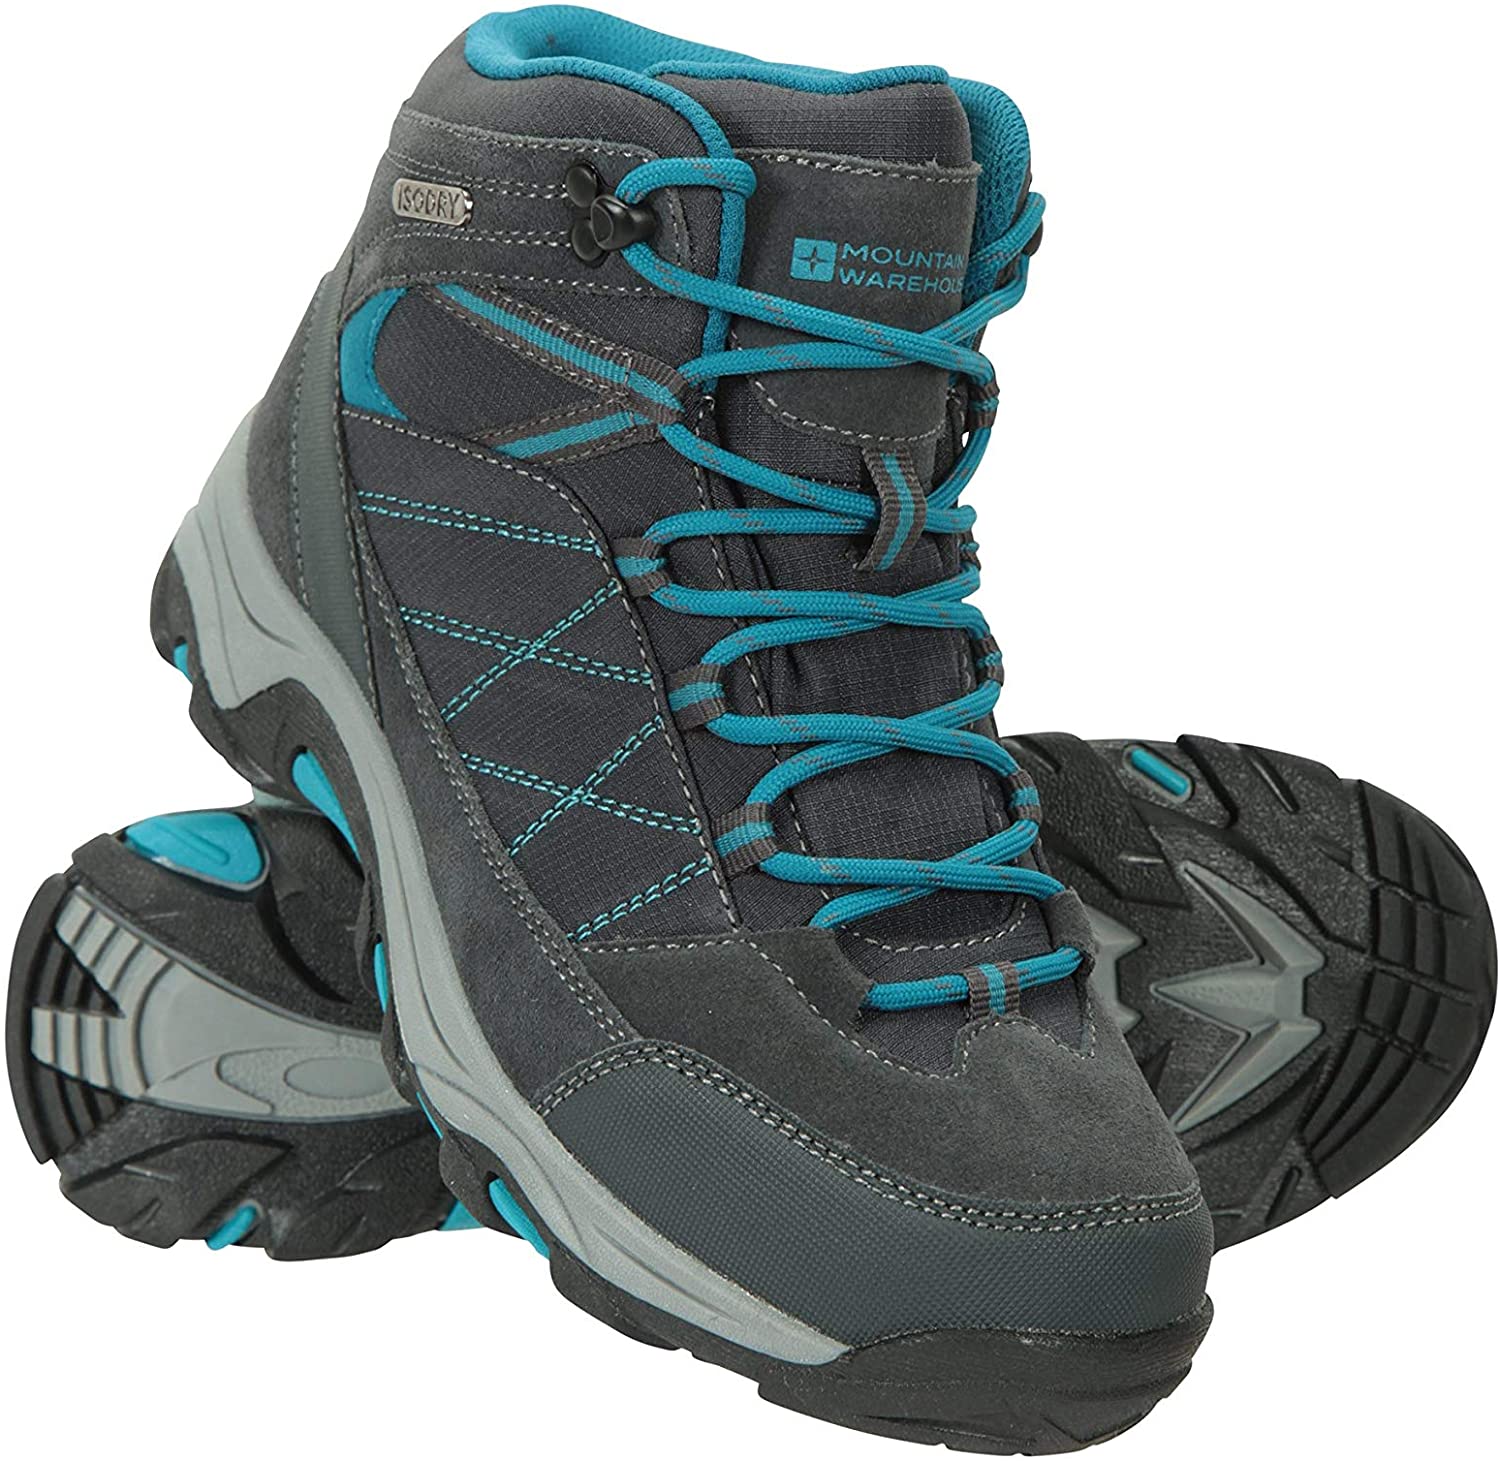 Mountain Warehouse Womens Waterproof&Breathable Boots with Nubuck Leather Upper 